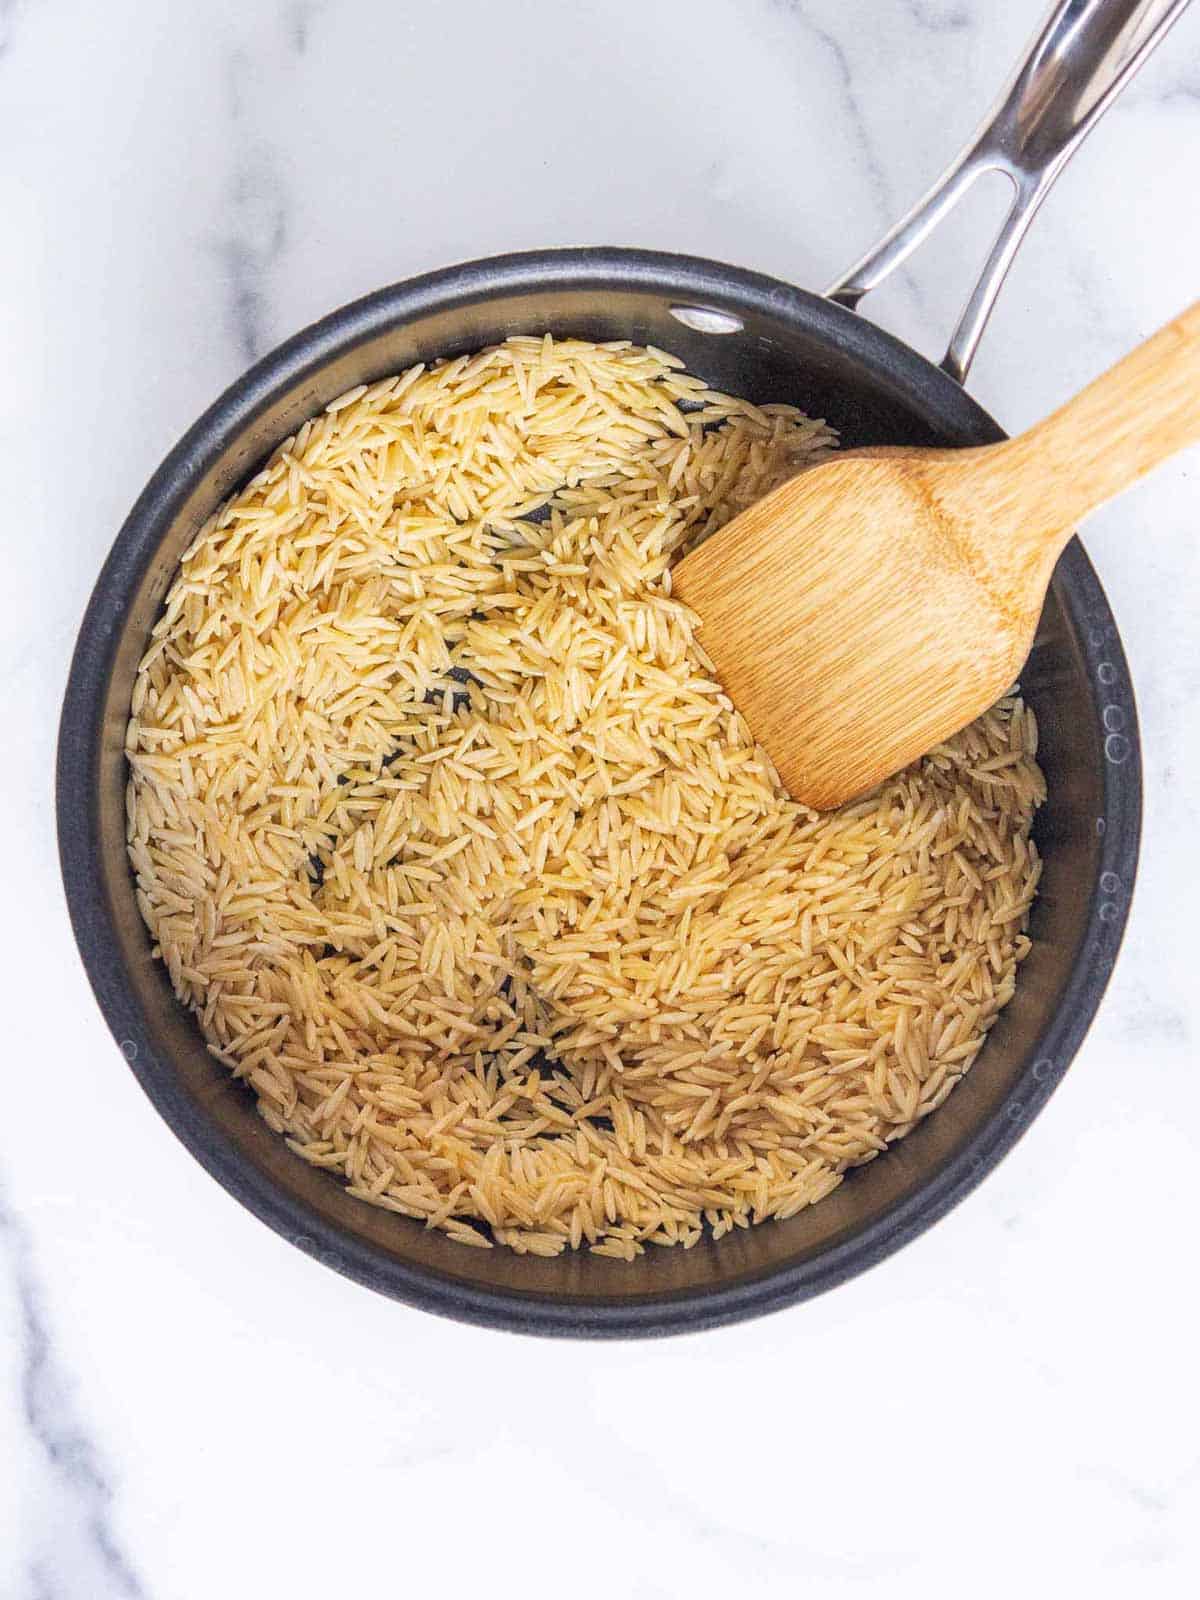 Uncooked orzo coated in butter in a medium saucepan.